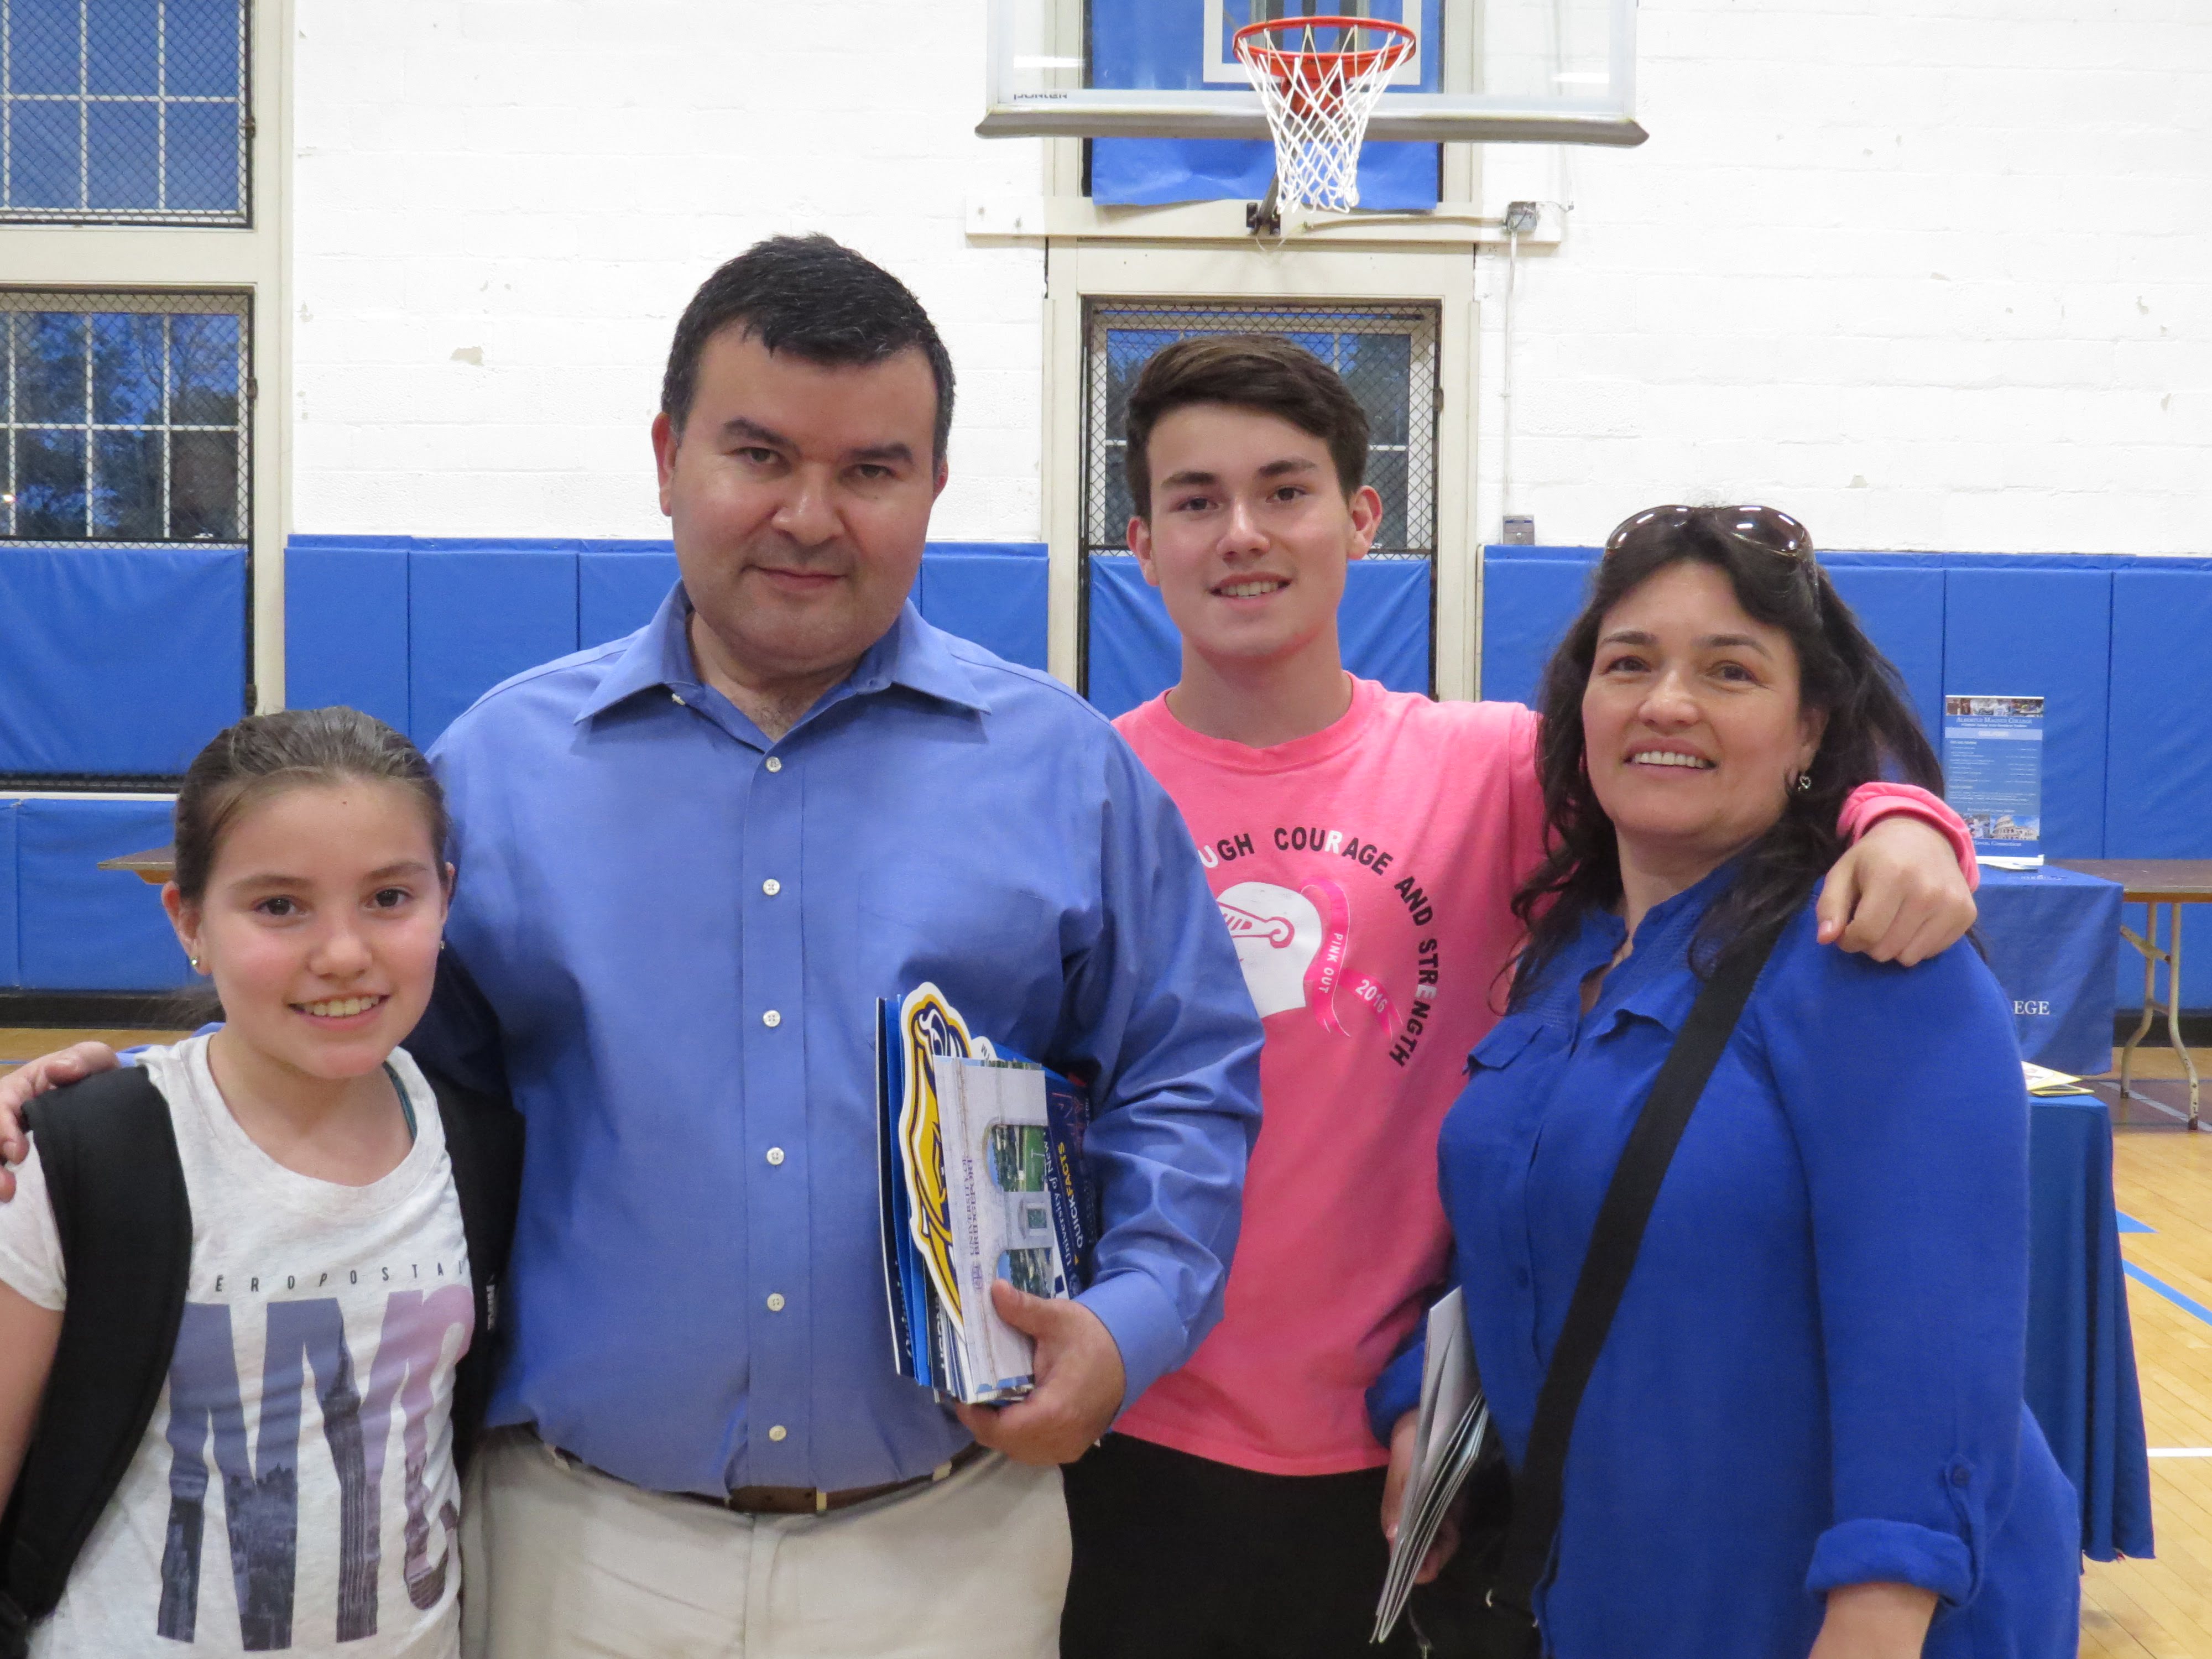 Marvin Campos (center right) and his family attend the BGCG college fair. May 23, 2017. Photo: Devon Bedoya